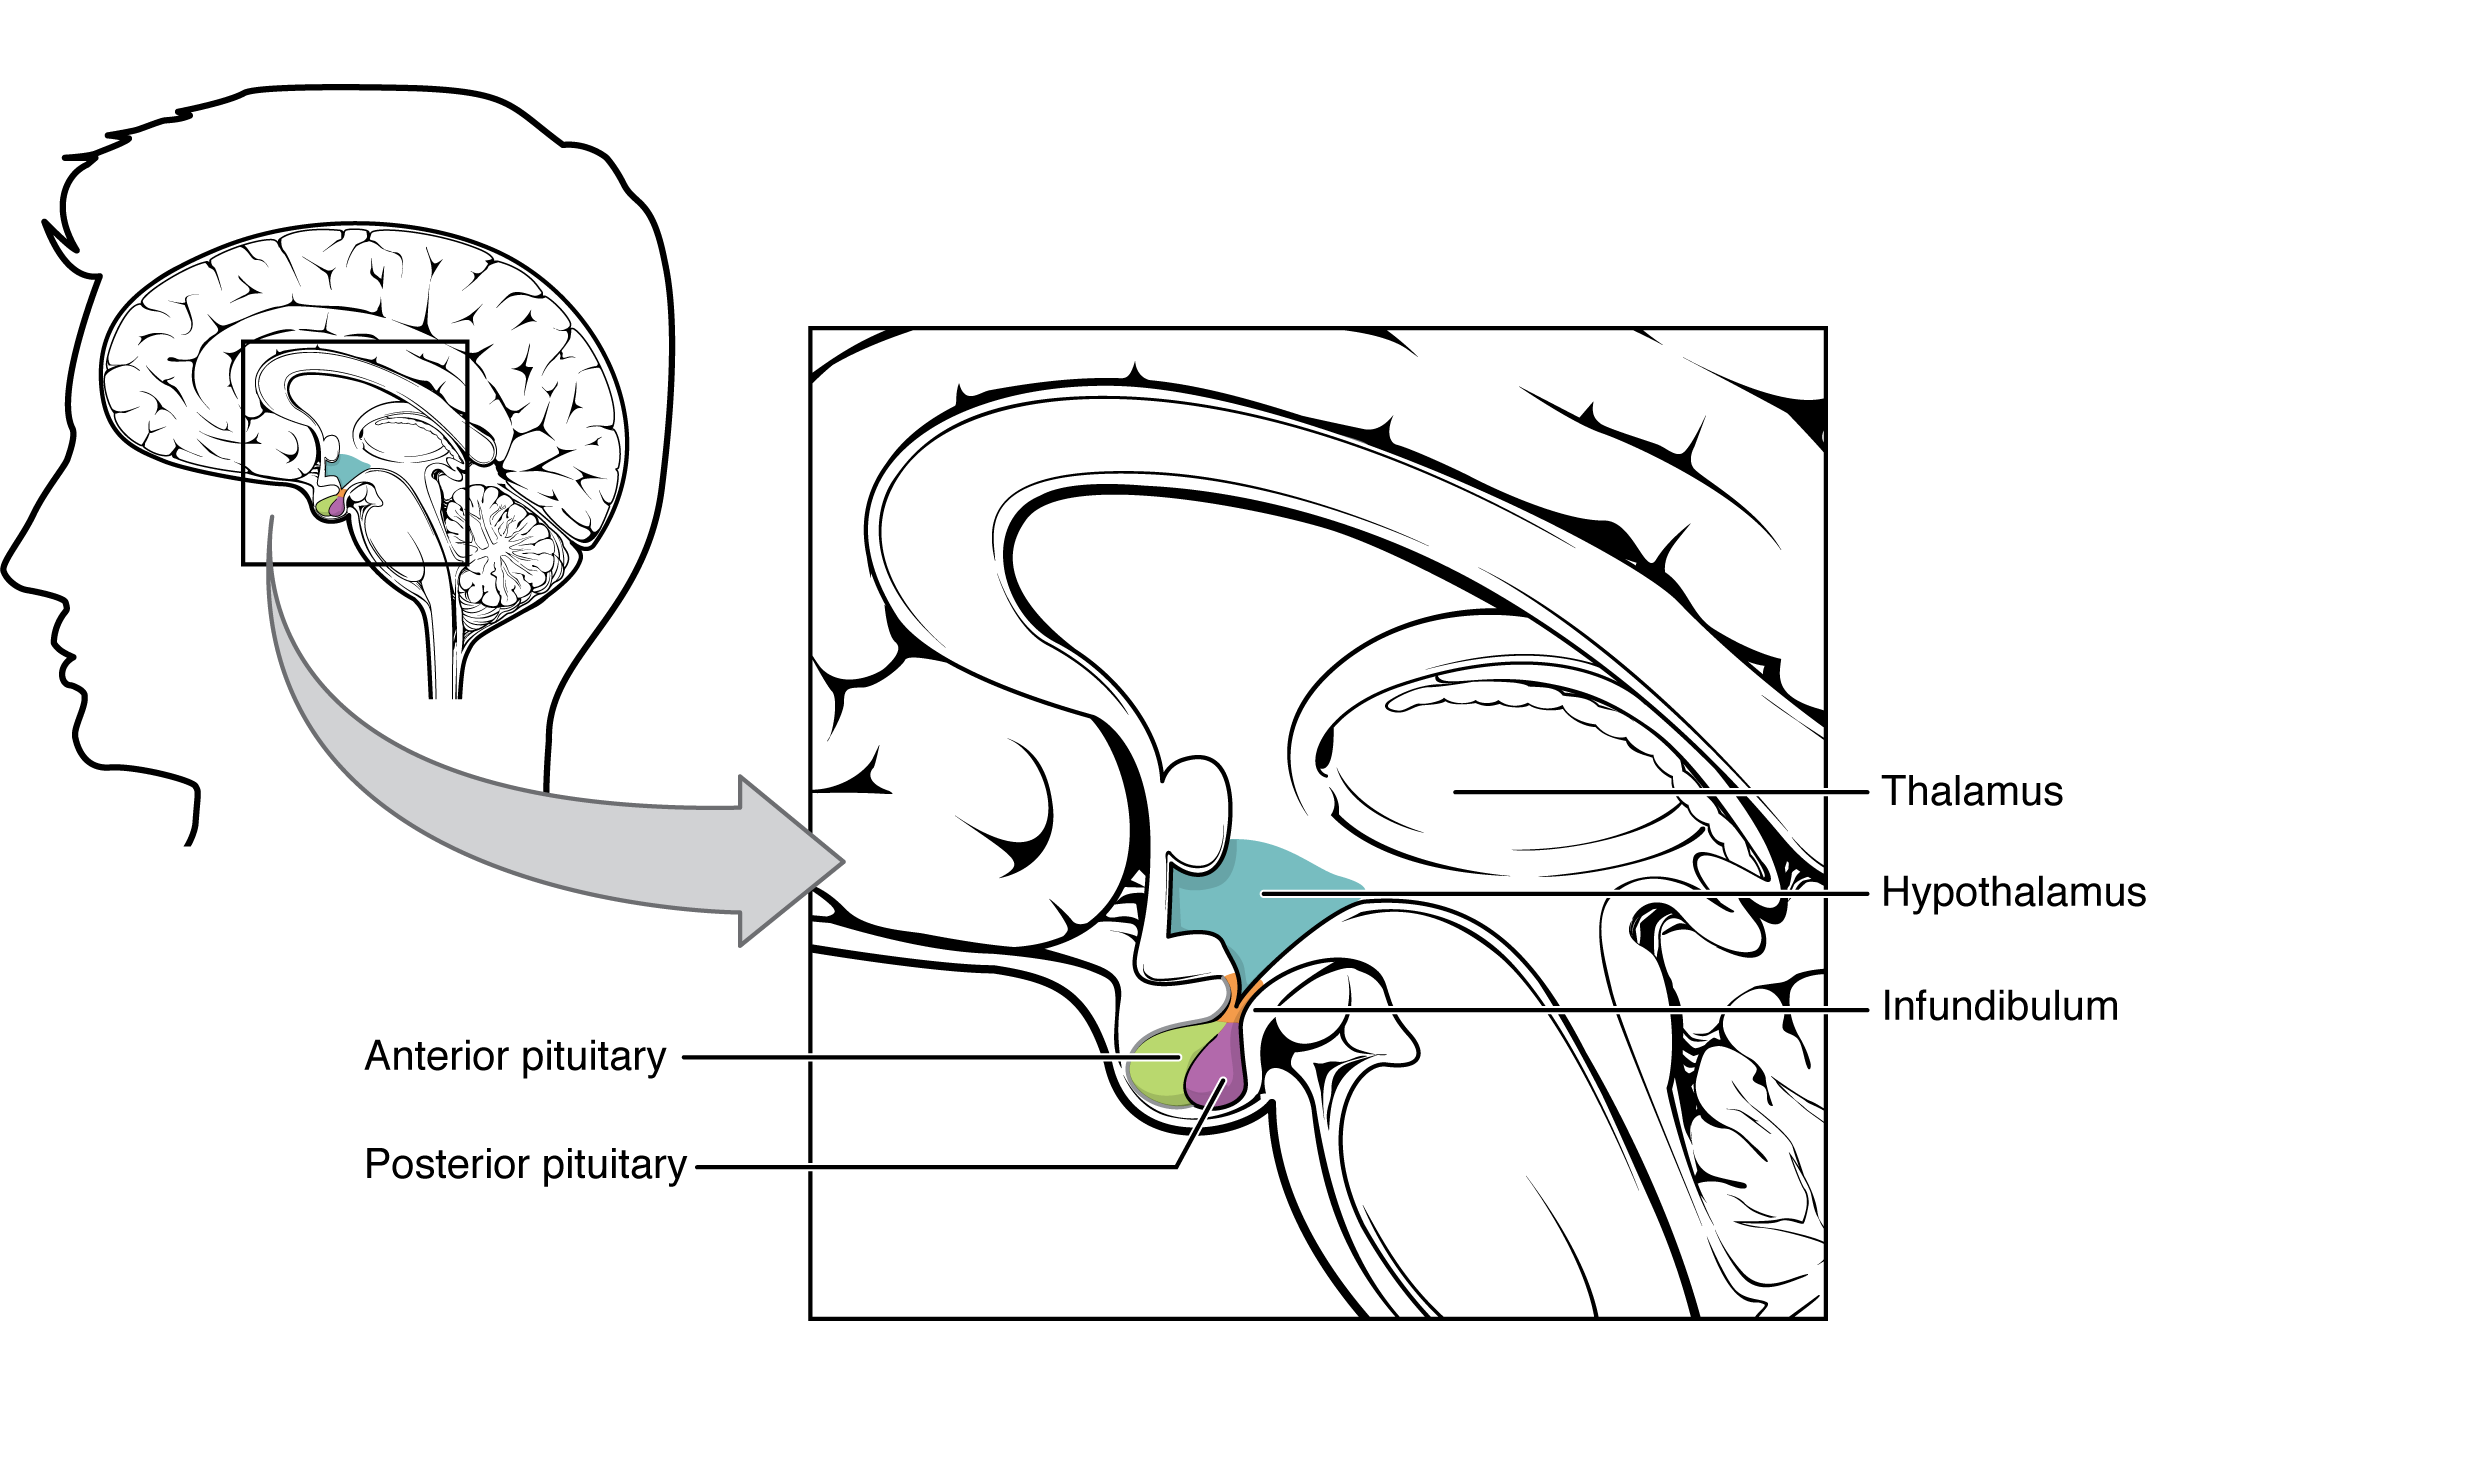 This illustration shows the hypothalamus-pituitary complex, which is located at the base of the brain and shown here from a lateral view. The hypothalamus lies inferior and anterior to the thalamus, which is sits atop the brainstem. The hypothalamus connects to the pituitary gland by the stalk-like infundibulum. The pituitary gland looks like a sac containing two balls hanging from the infundibulum. The “balls” are the anterior and posterior lobes of the pituitary. Each lobe secretes different hormones in response to signals from the hypothalamus.